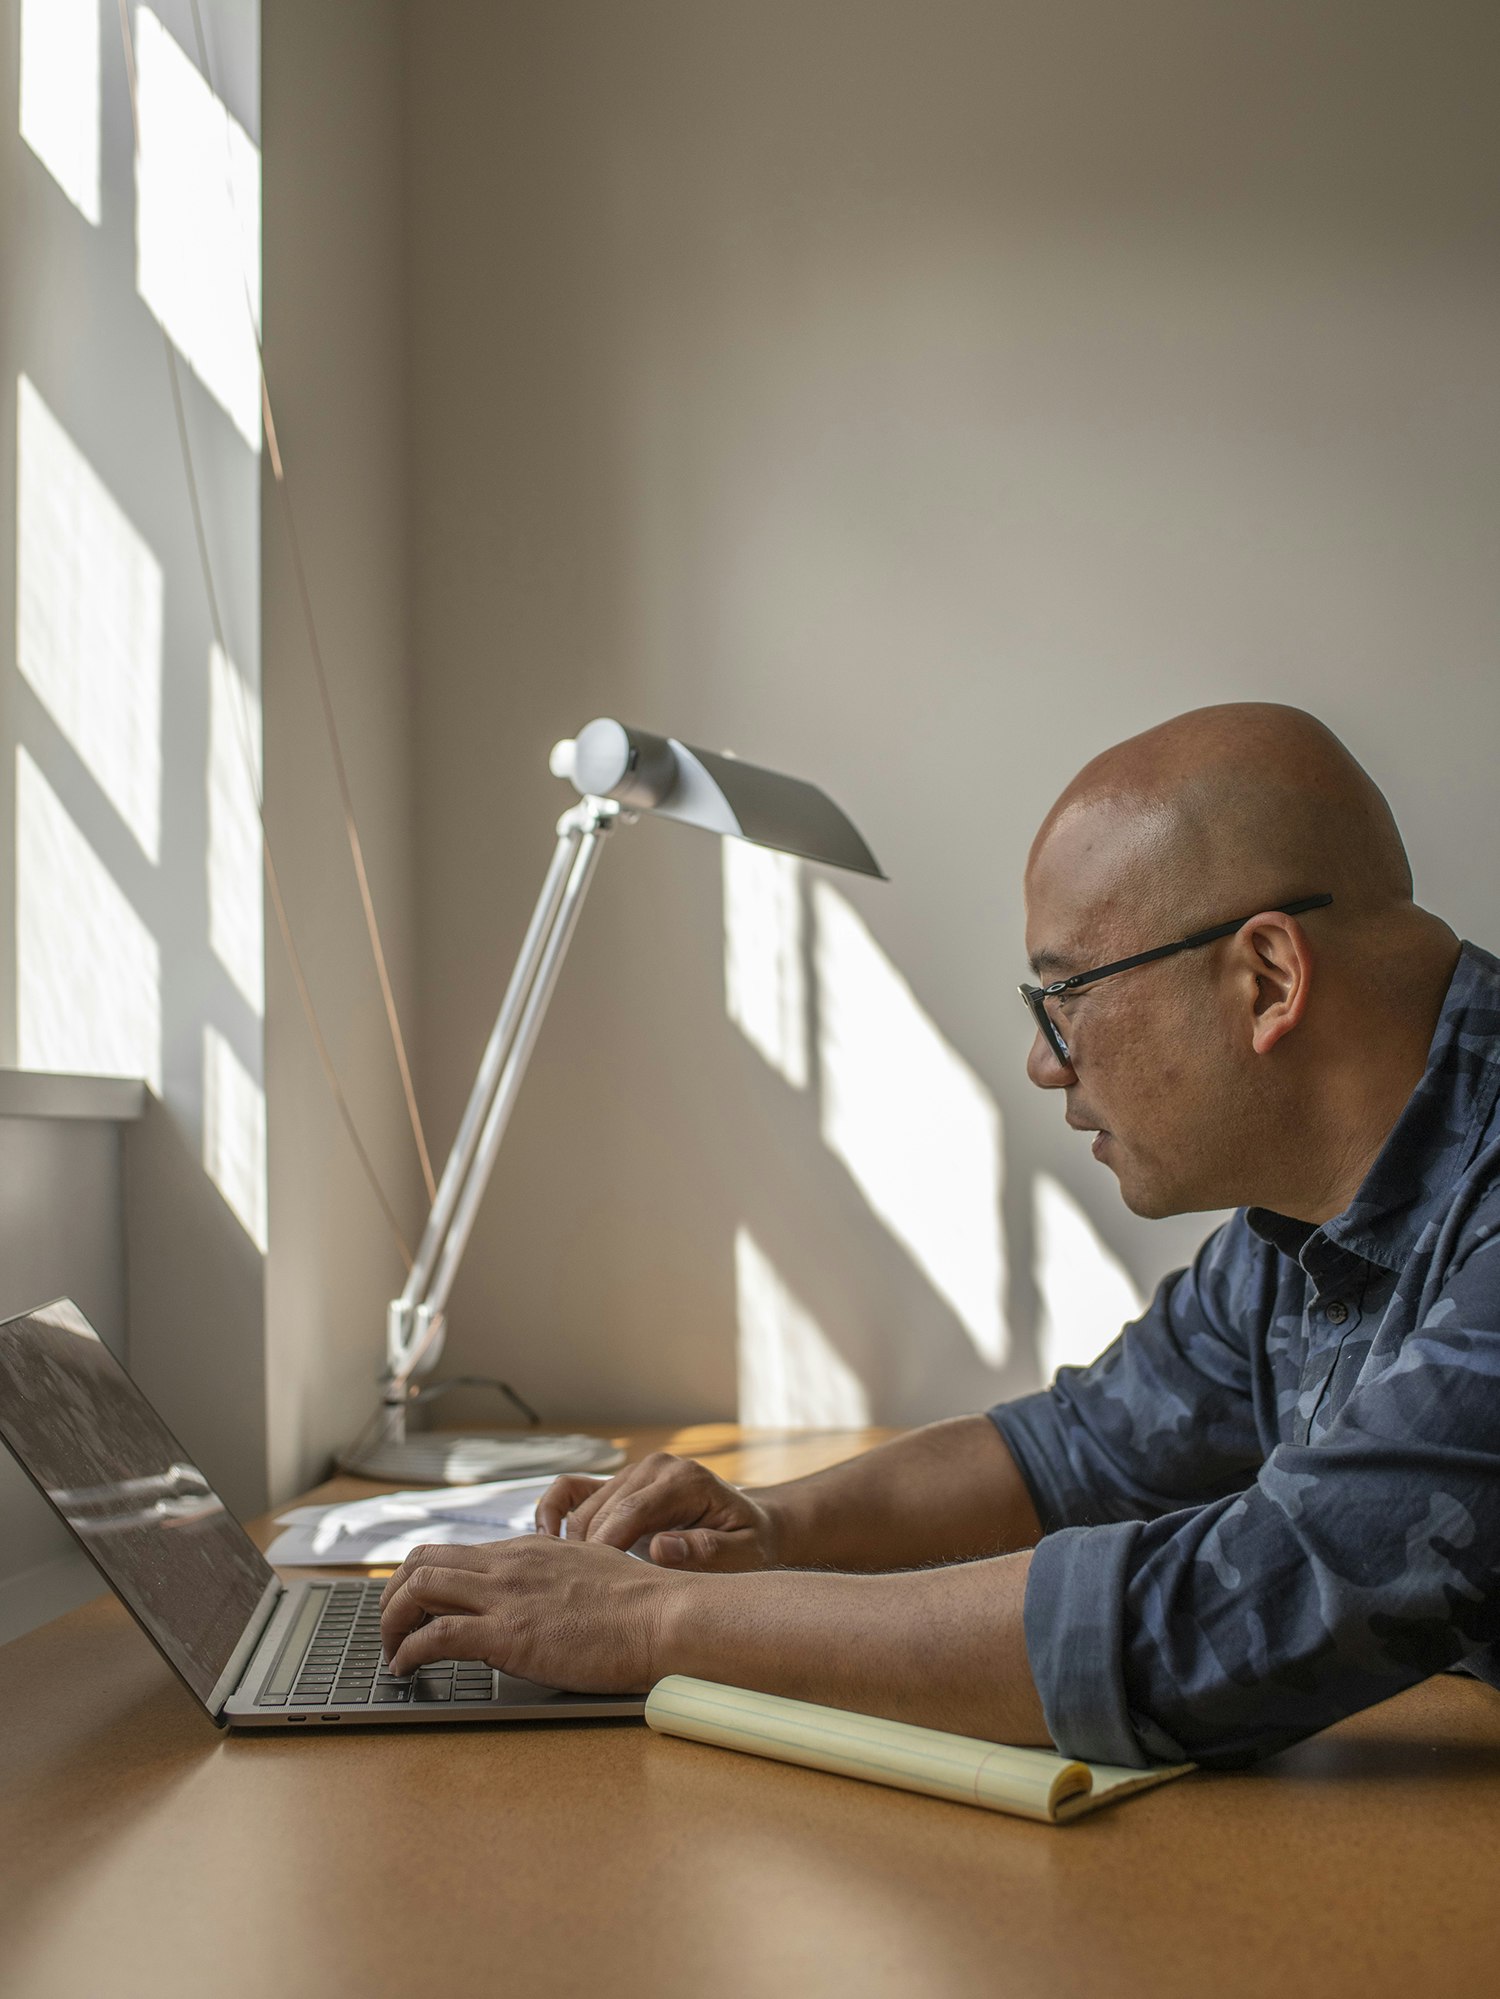 A man, in profile, types on a laptop as the sun streams in the window.